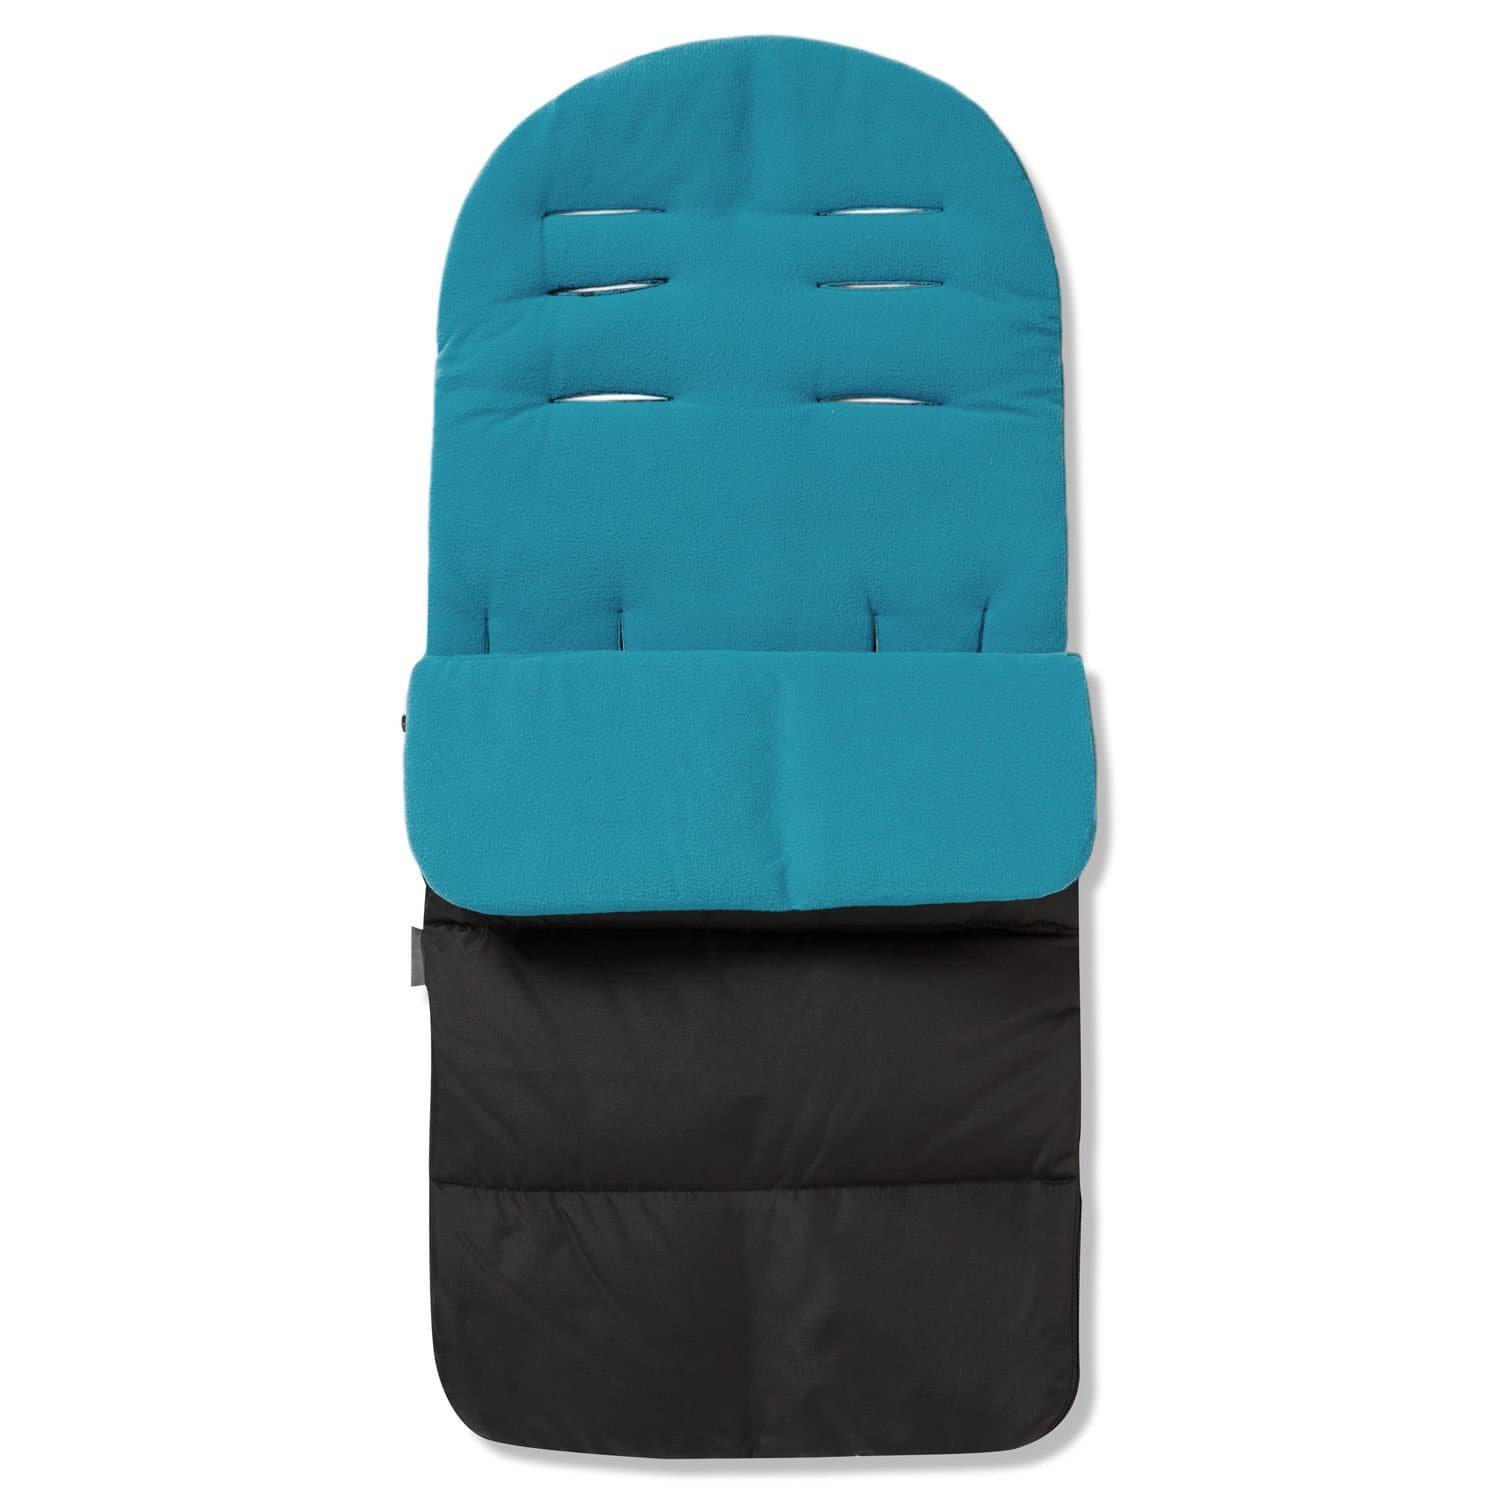 Premium Footmuff / Cosy Toes Compatible with Maxi Cosi - Ocean Blue / Fits All Models | For Your Little One